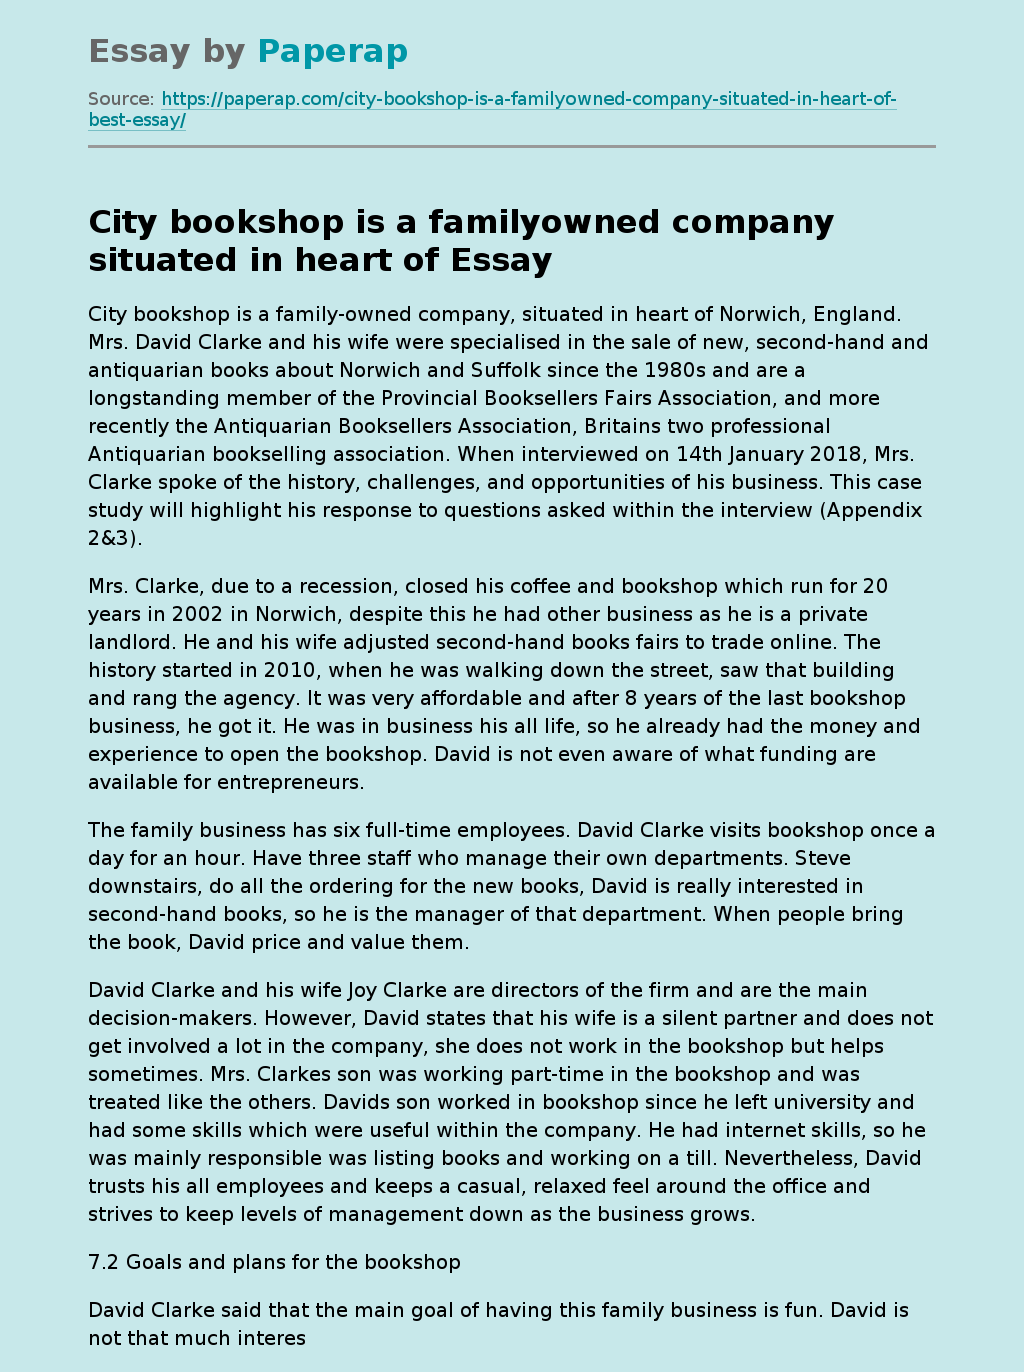 City bookshop is a familyowned company situated in heart of